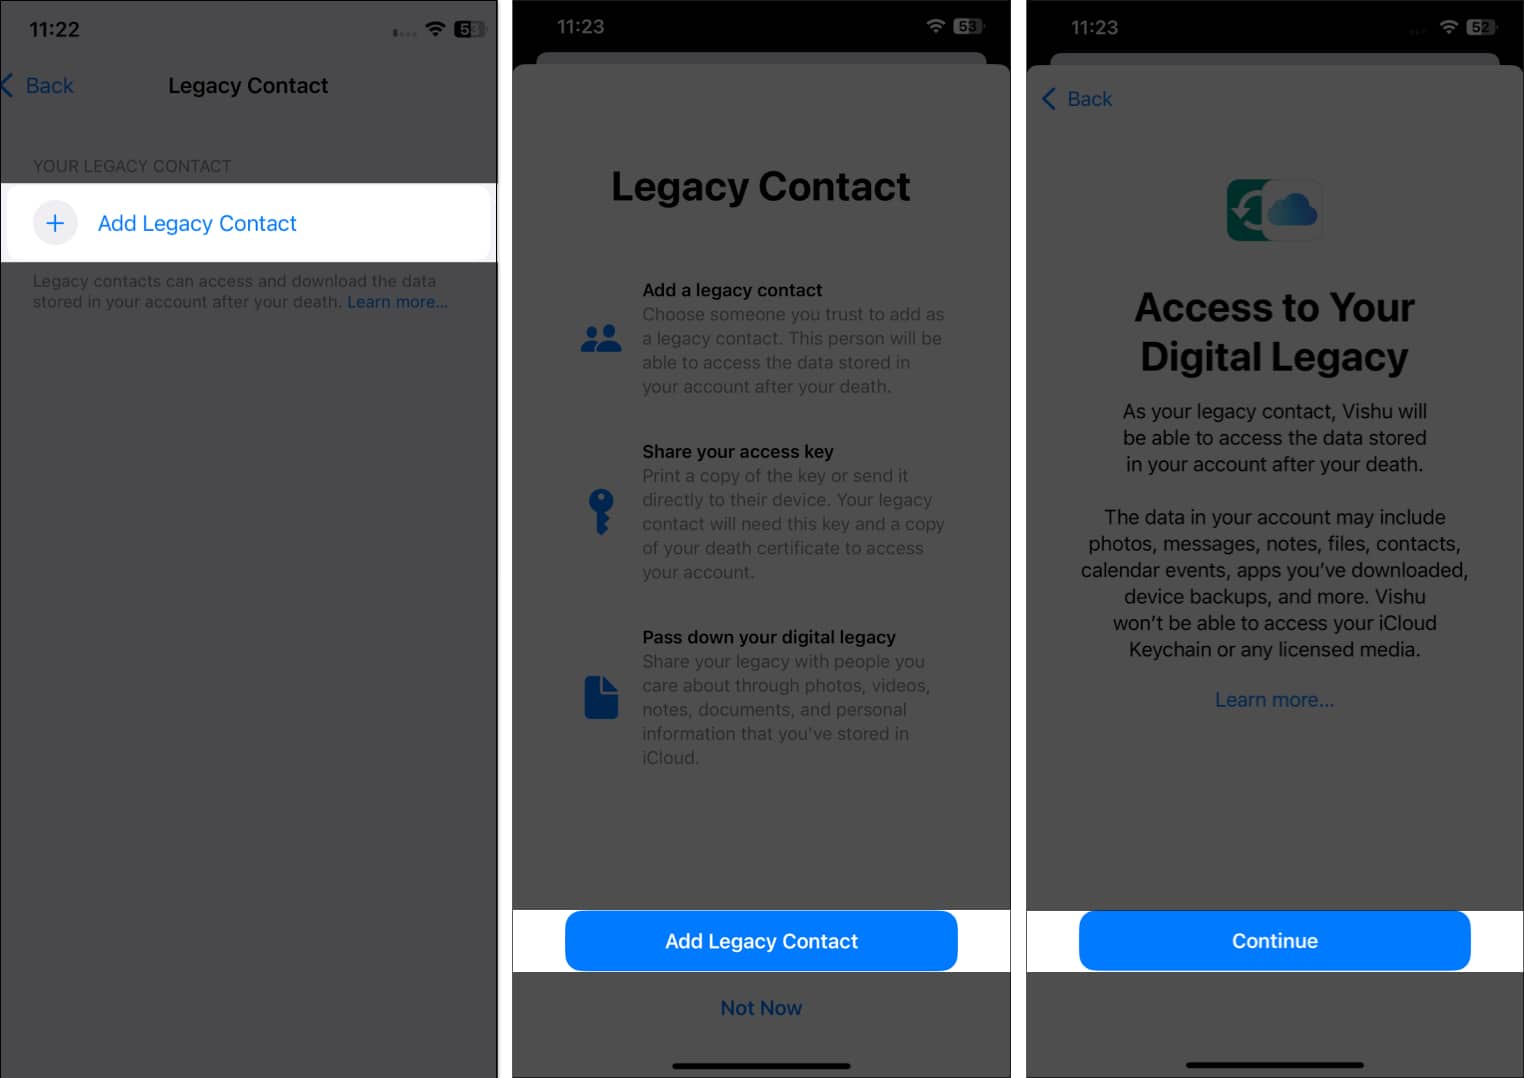 Add Legacy Contact button in the iPhone Settings app to set up a Legacy Contact.